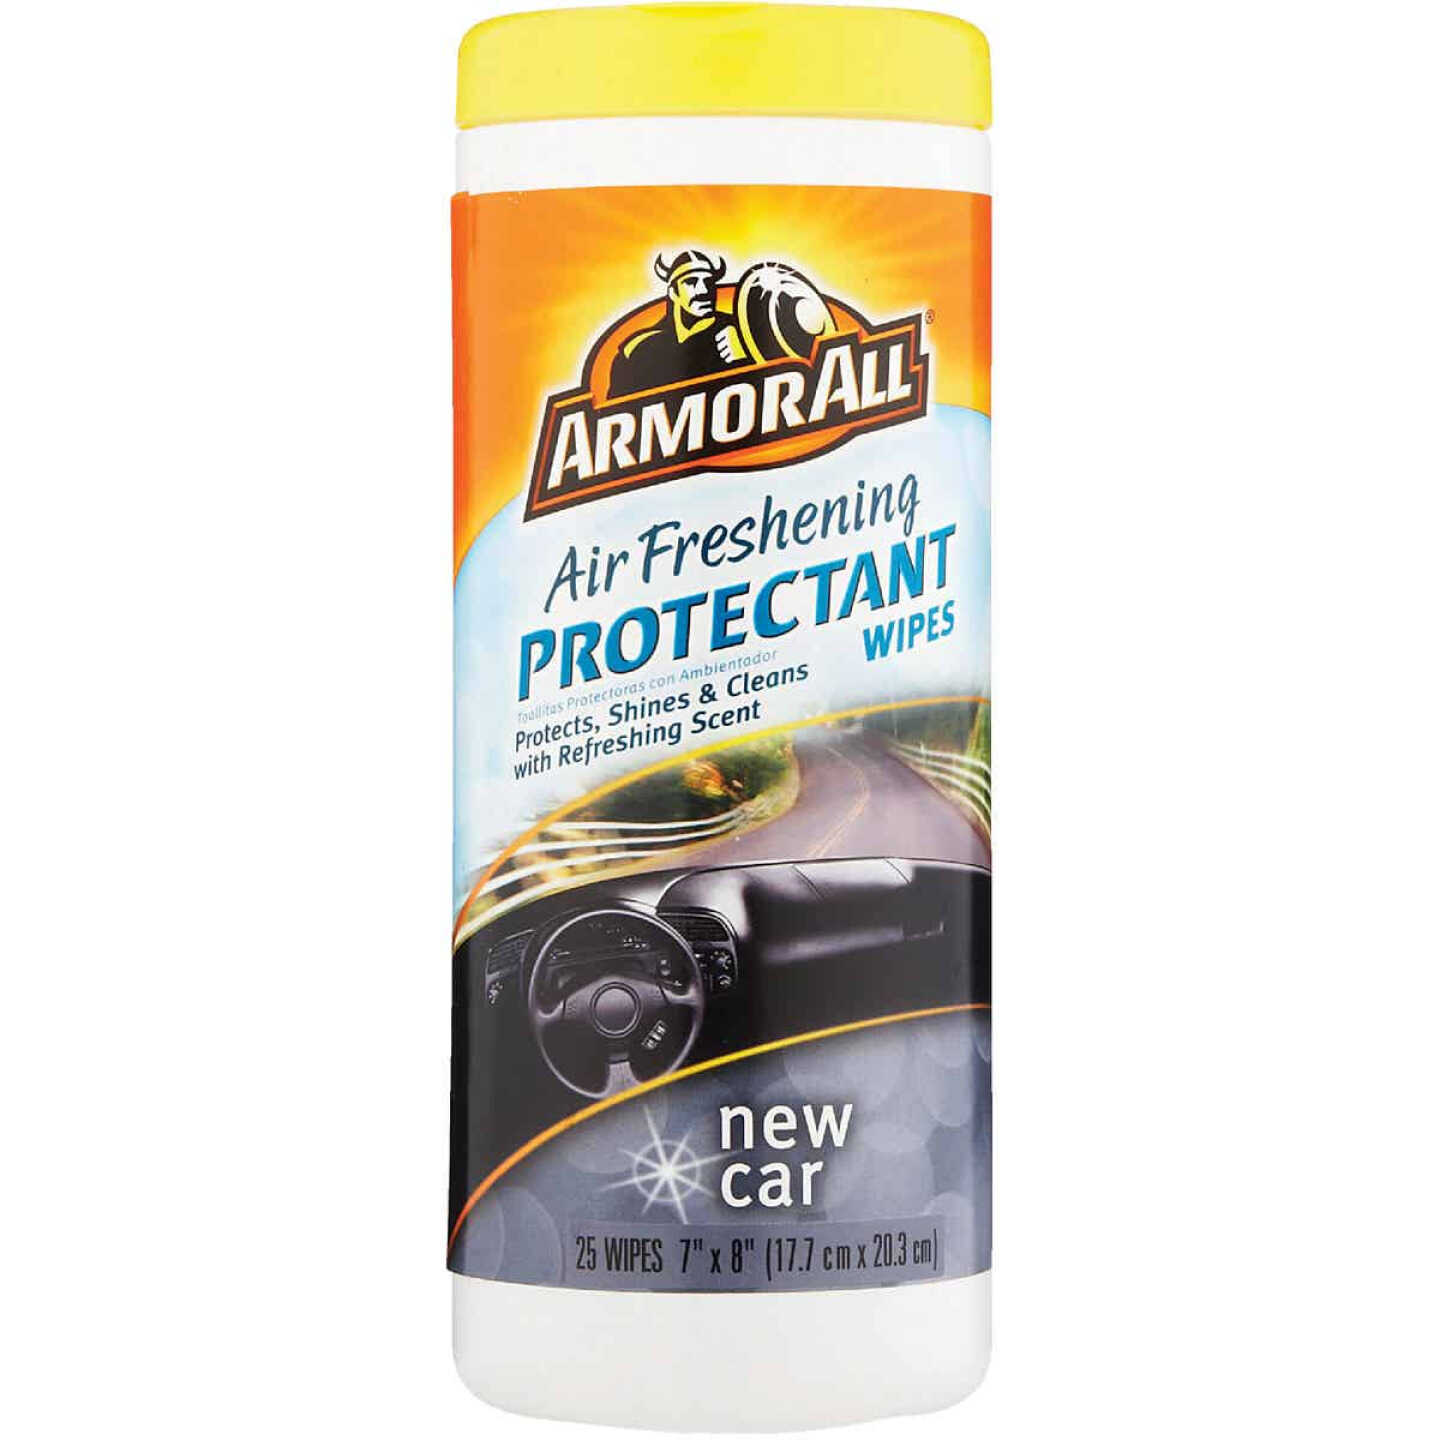 Armor All New Car Scent Air Freshening Protectant Wipe (25-Count